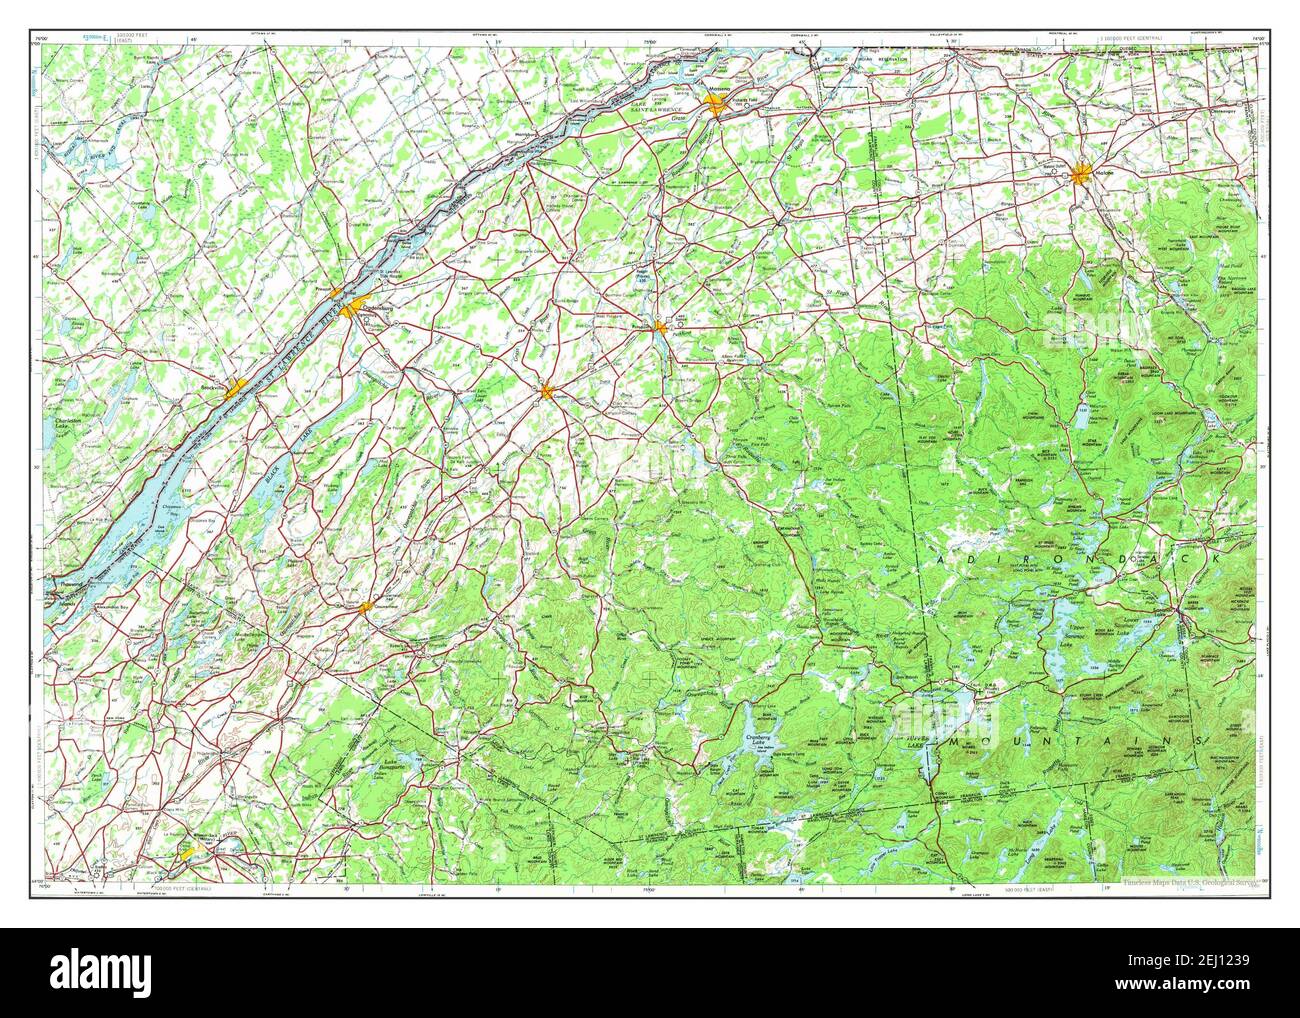 Ogdensburg, New York, map 1948, 1:250000, United States of America by Timeless Maps, data U.S. Geological Survey Foto Stock